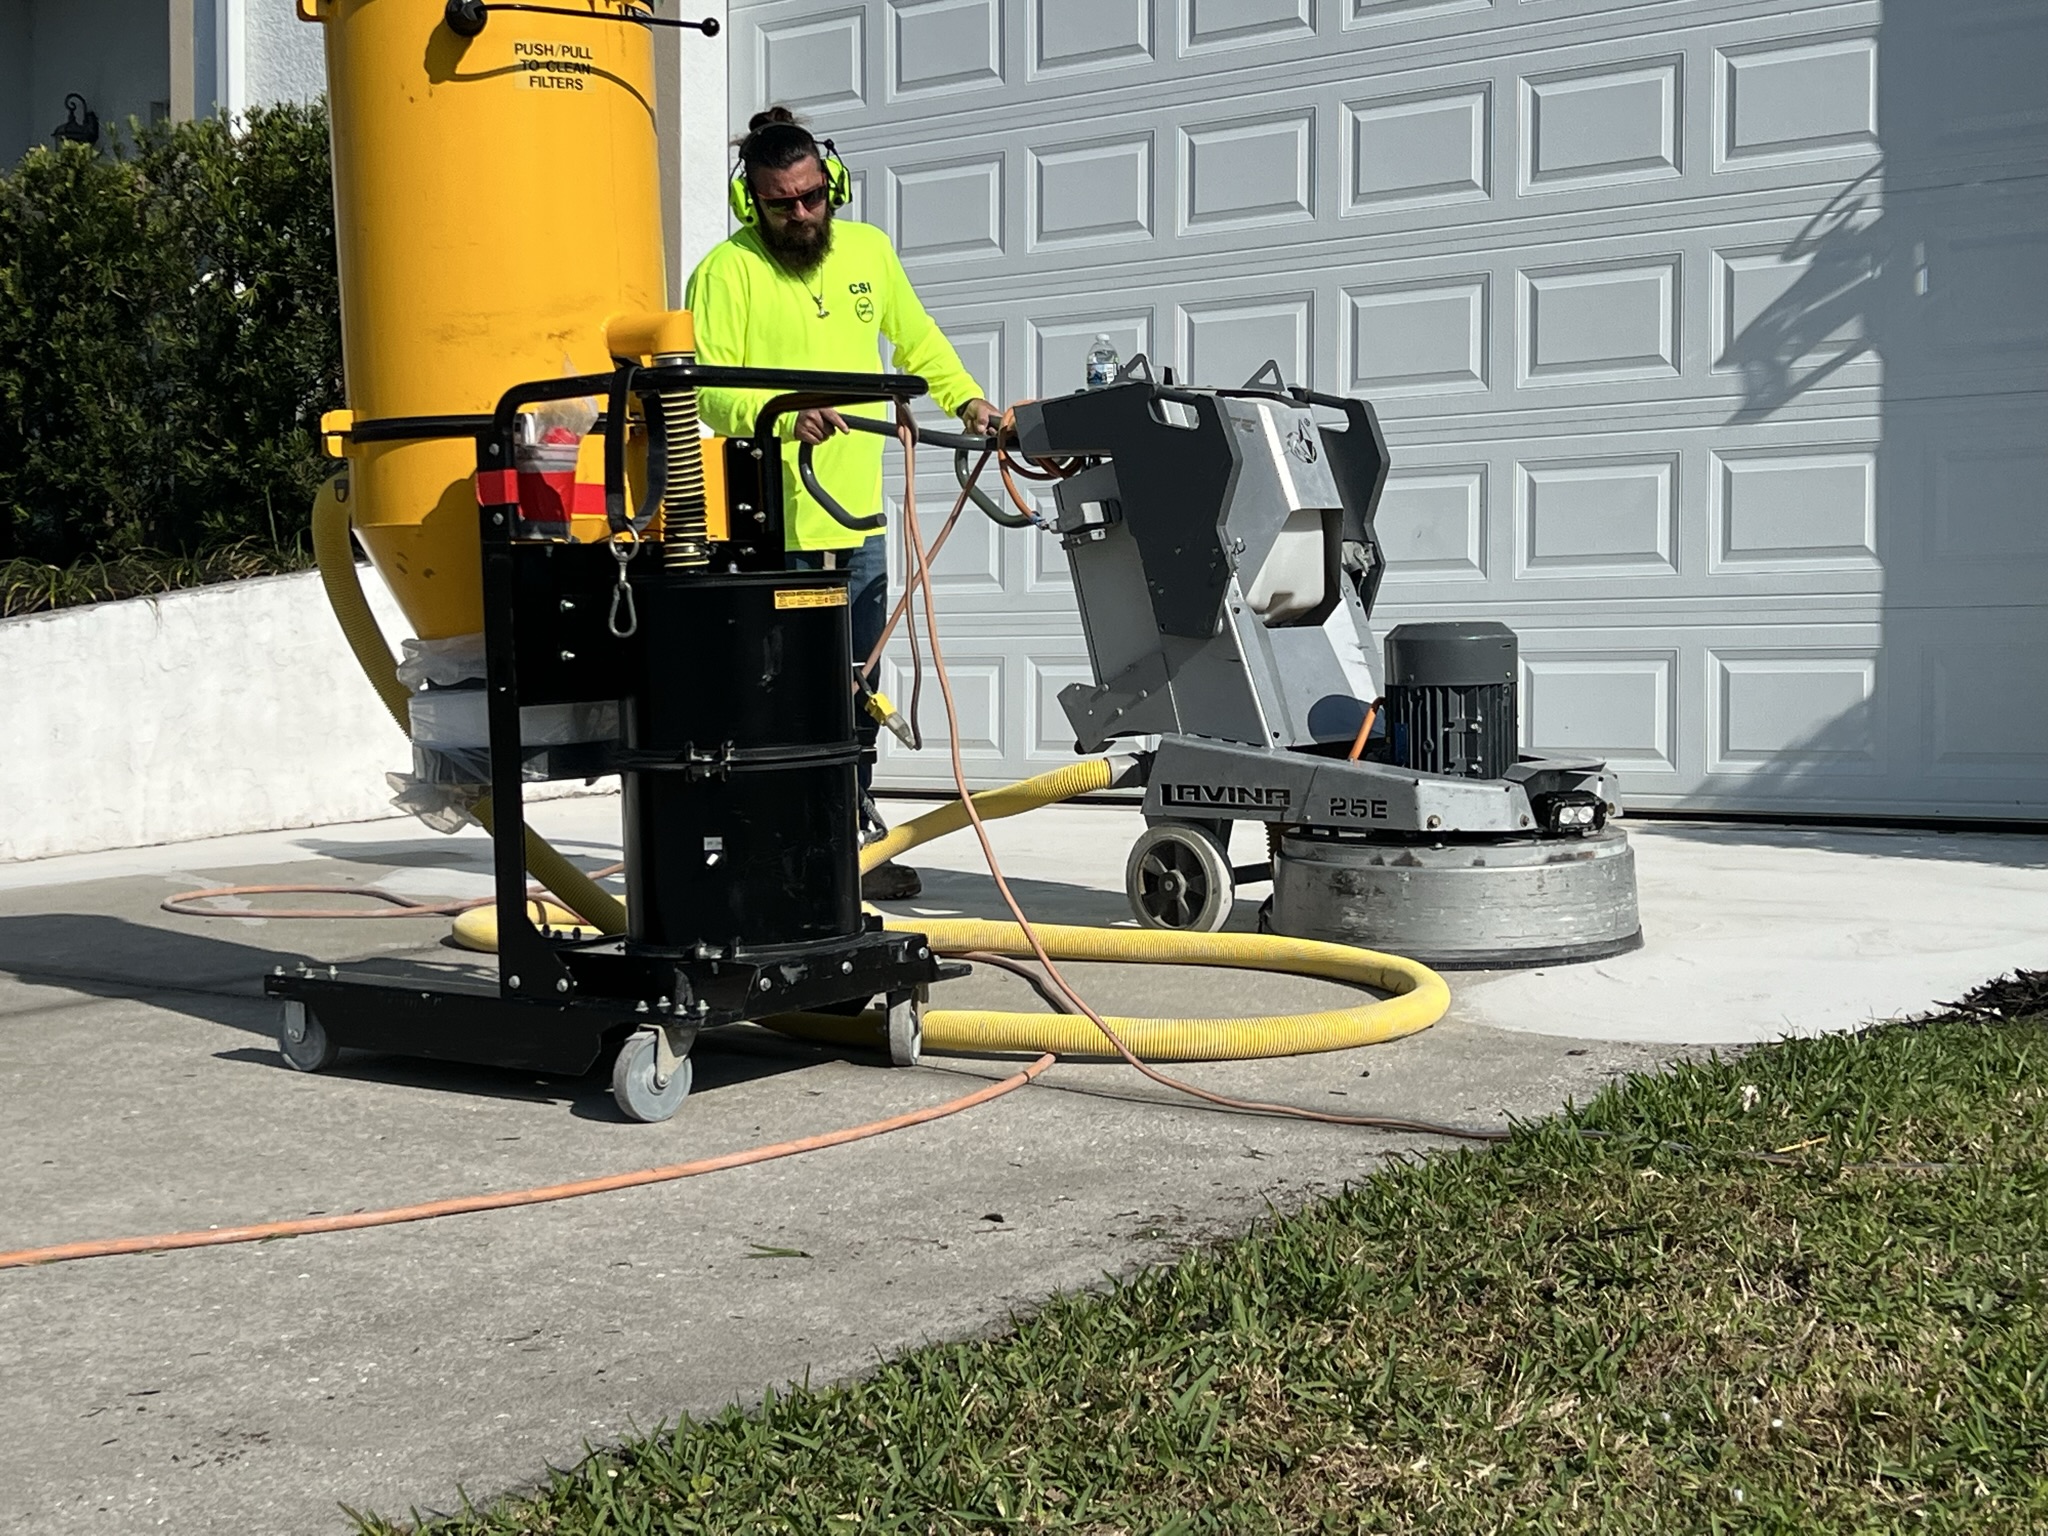 Contractor wearing protective gear expertly uses a grinder to smooth out the concrete driveway surface for a flawless finish